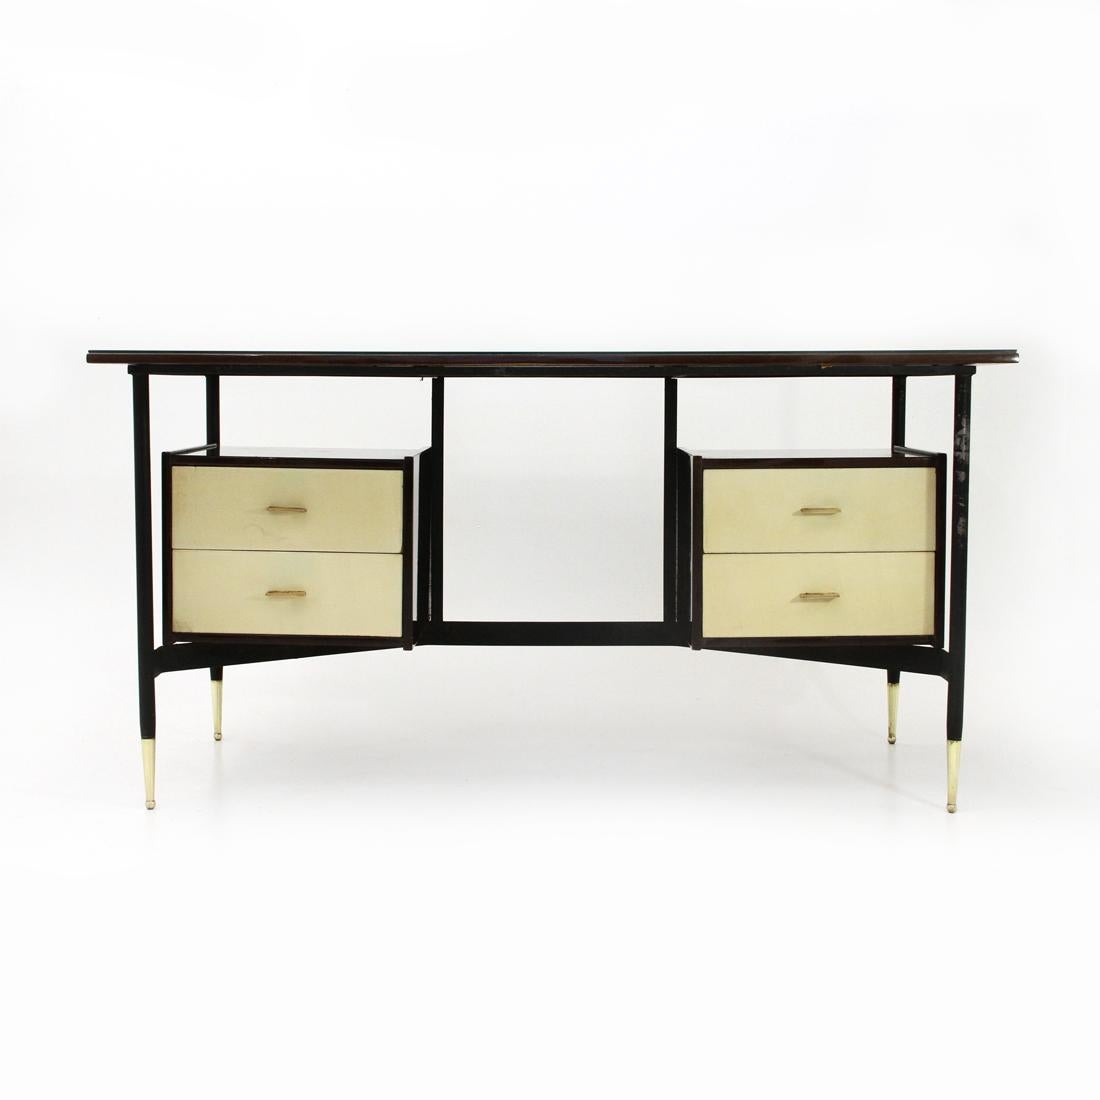 Desk produced in the 1950s by RB Rossana.
Structure in black painted metal.
Veneered wood top with glass top plate.
Drawer structure in black lacquered wood, black glass back.
Drawers with white front surface and brass handle.
Feet in